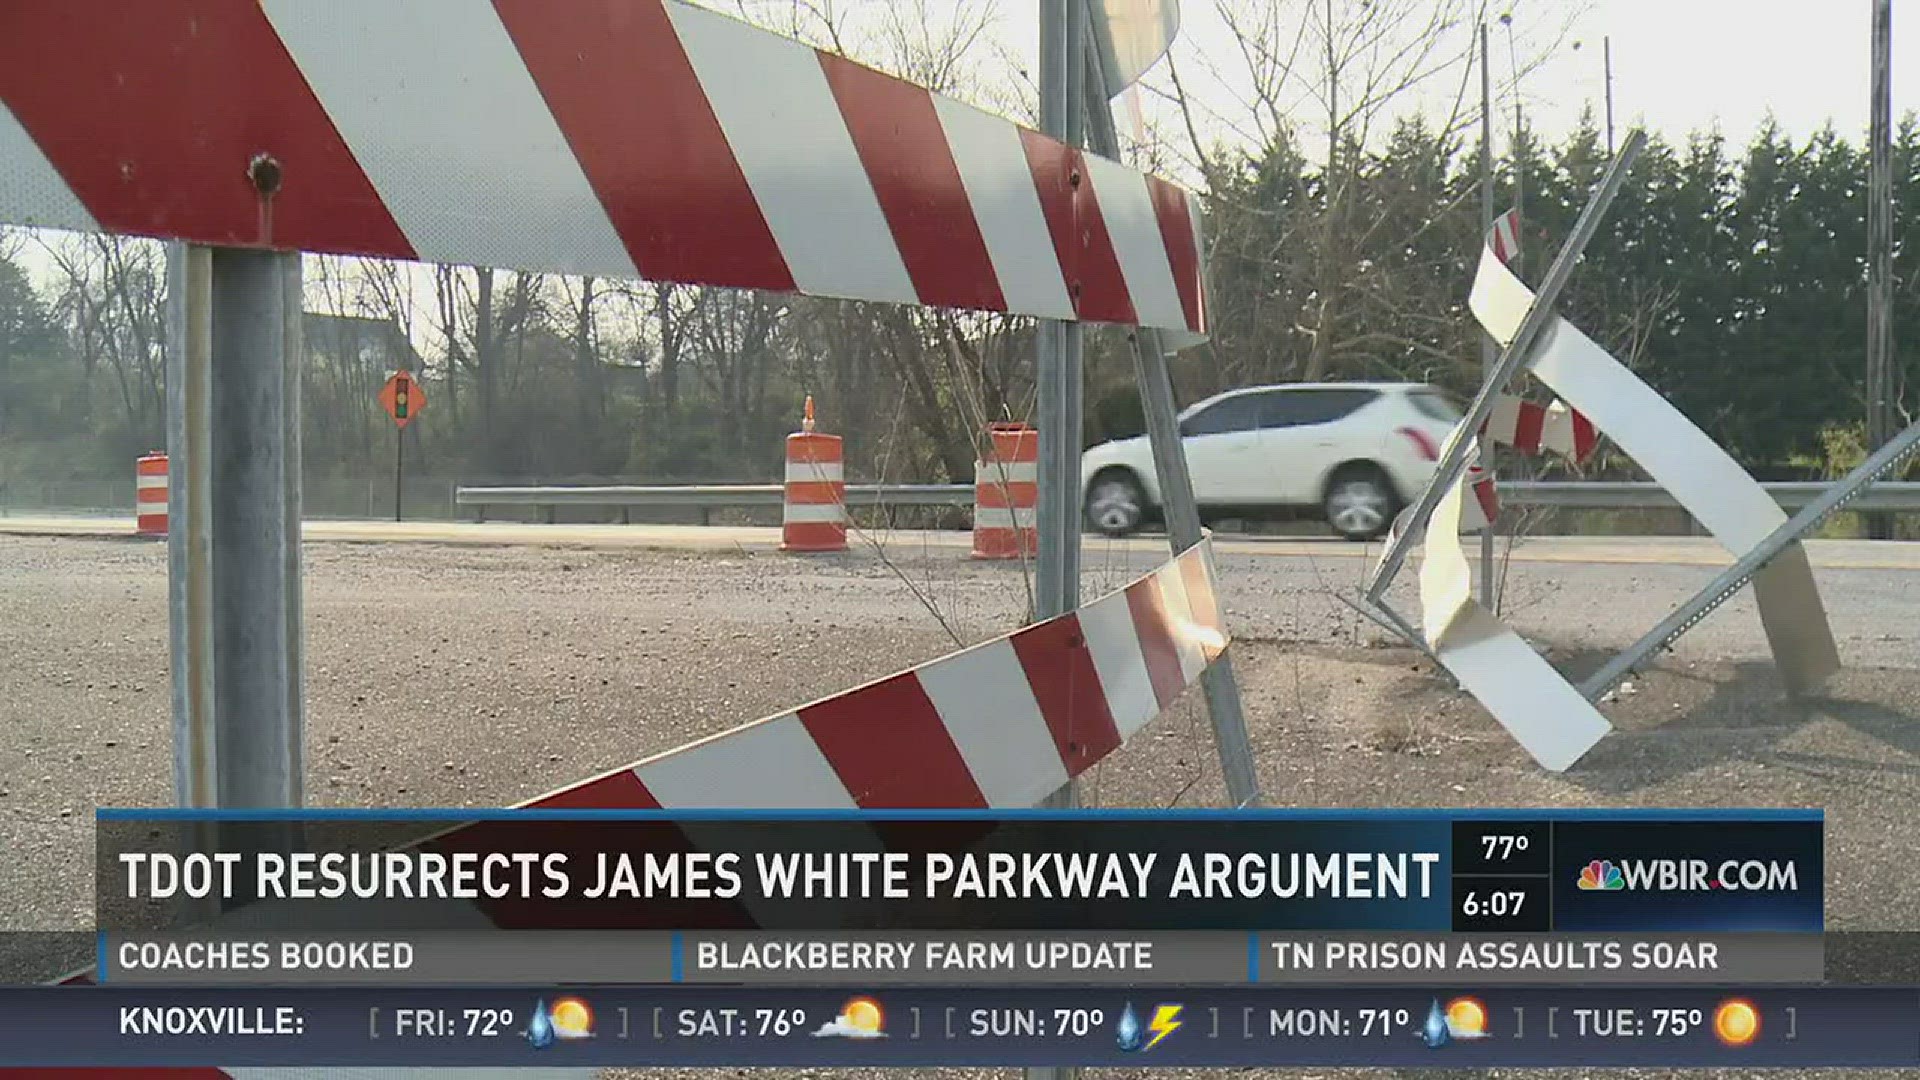 The state says there's only so much it can do for a dangerous route as long as Knoxville refuses to extend the James White Parkway. (3/10/16 6PM)